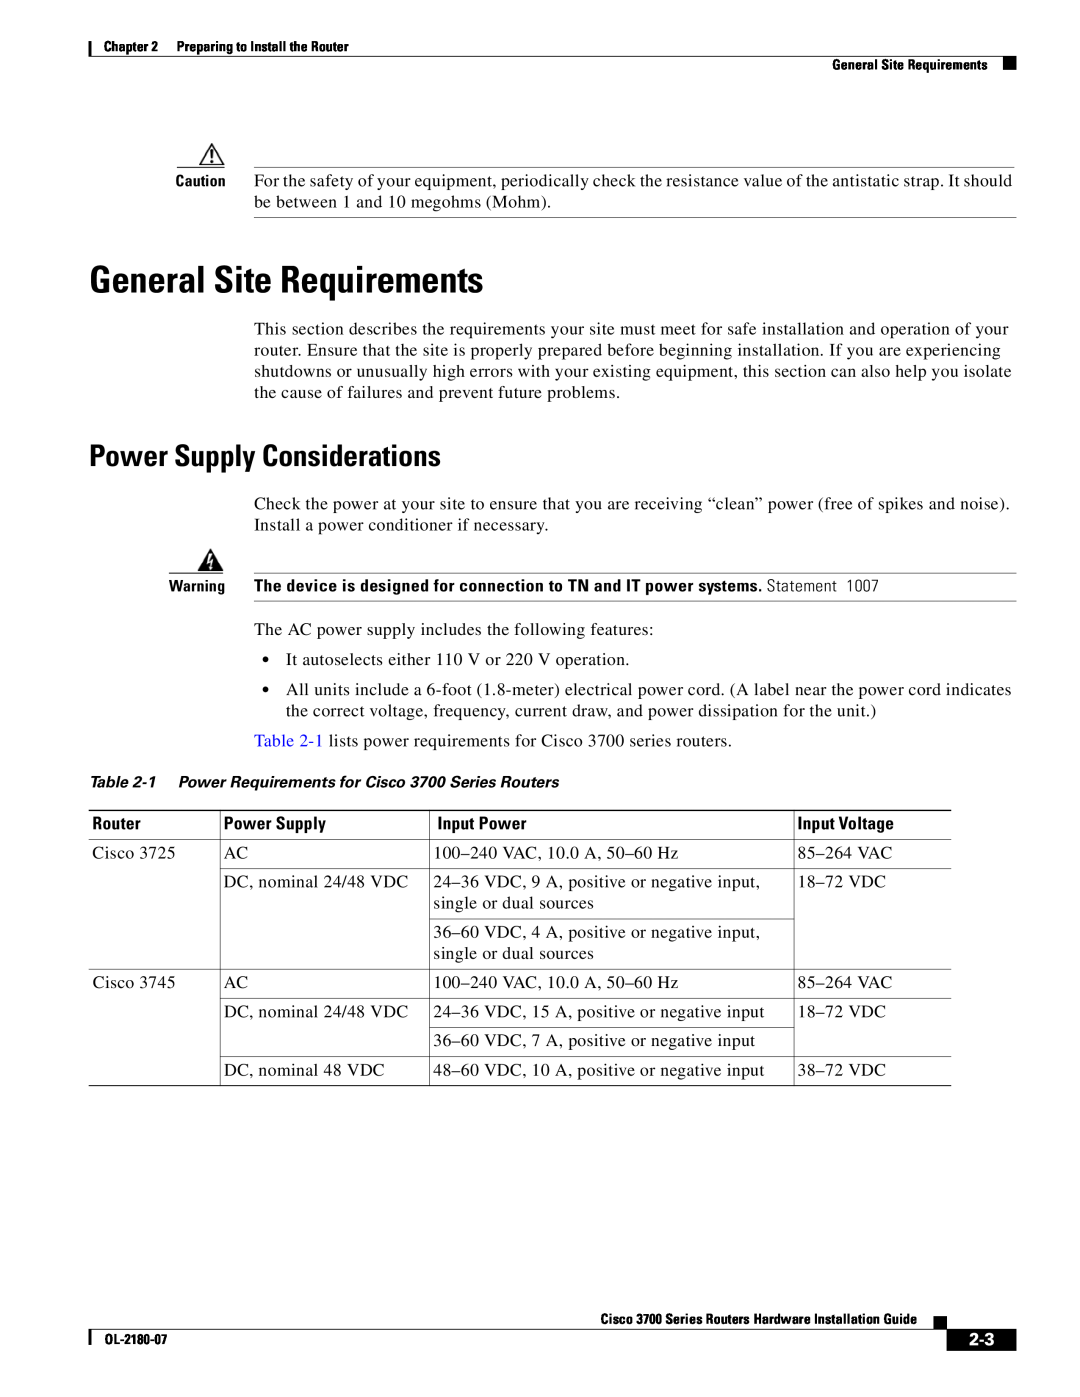 Cisco Systems 3700 Series manual General Site Requirements, Power Supply Considerations 